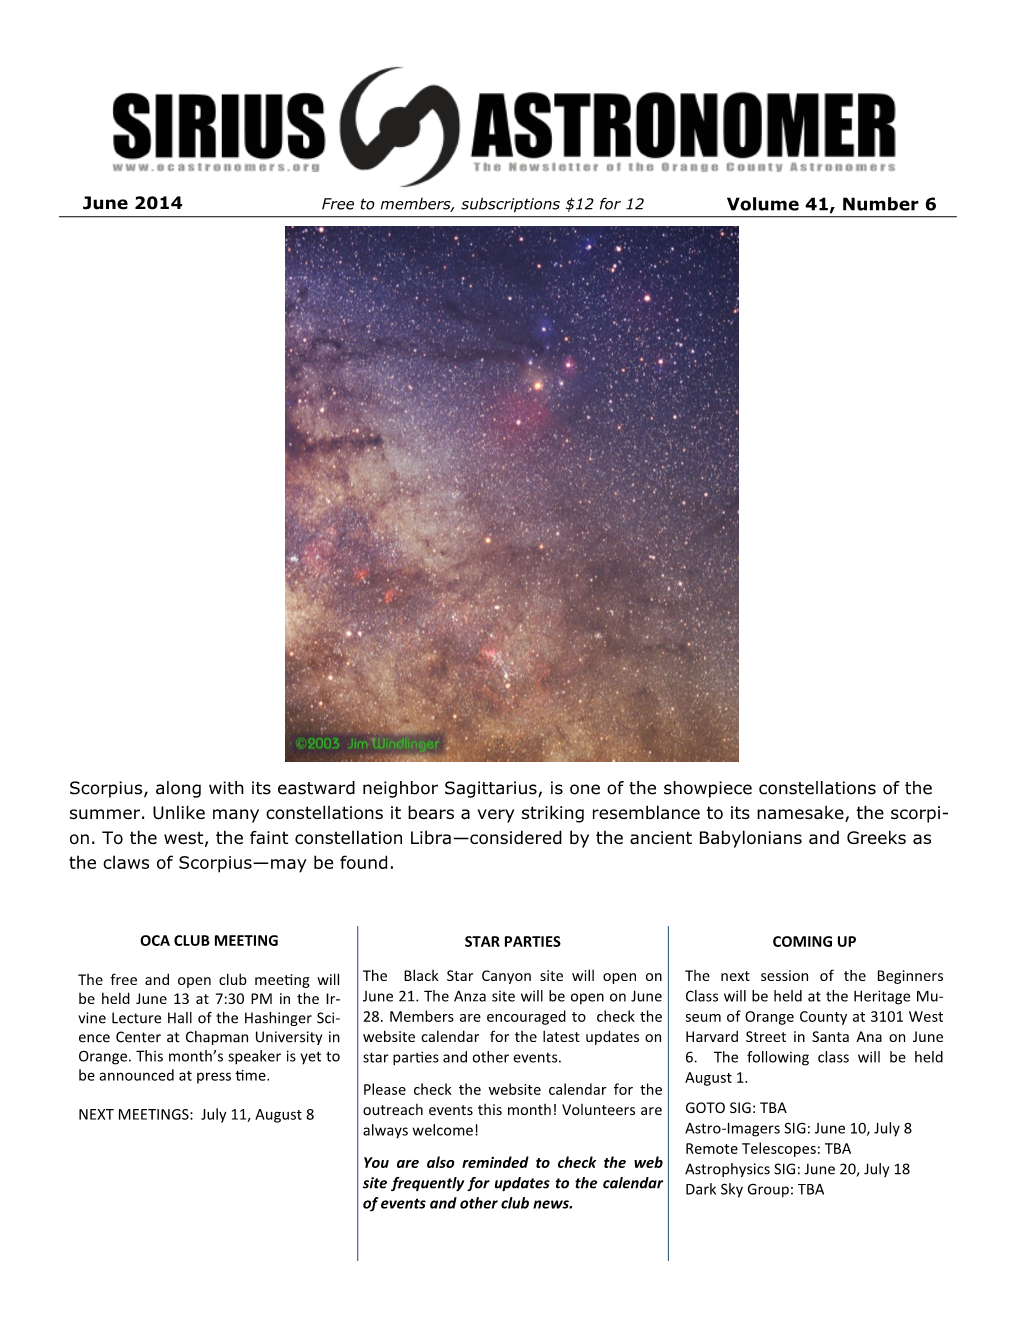 June 2014 Volume 41, Number 6 Scorpius, Along with Its Eastward